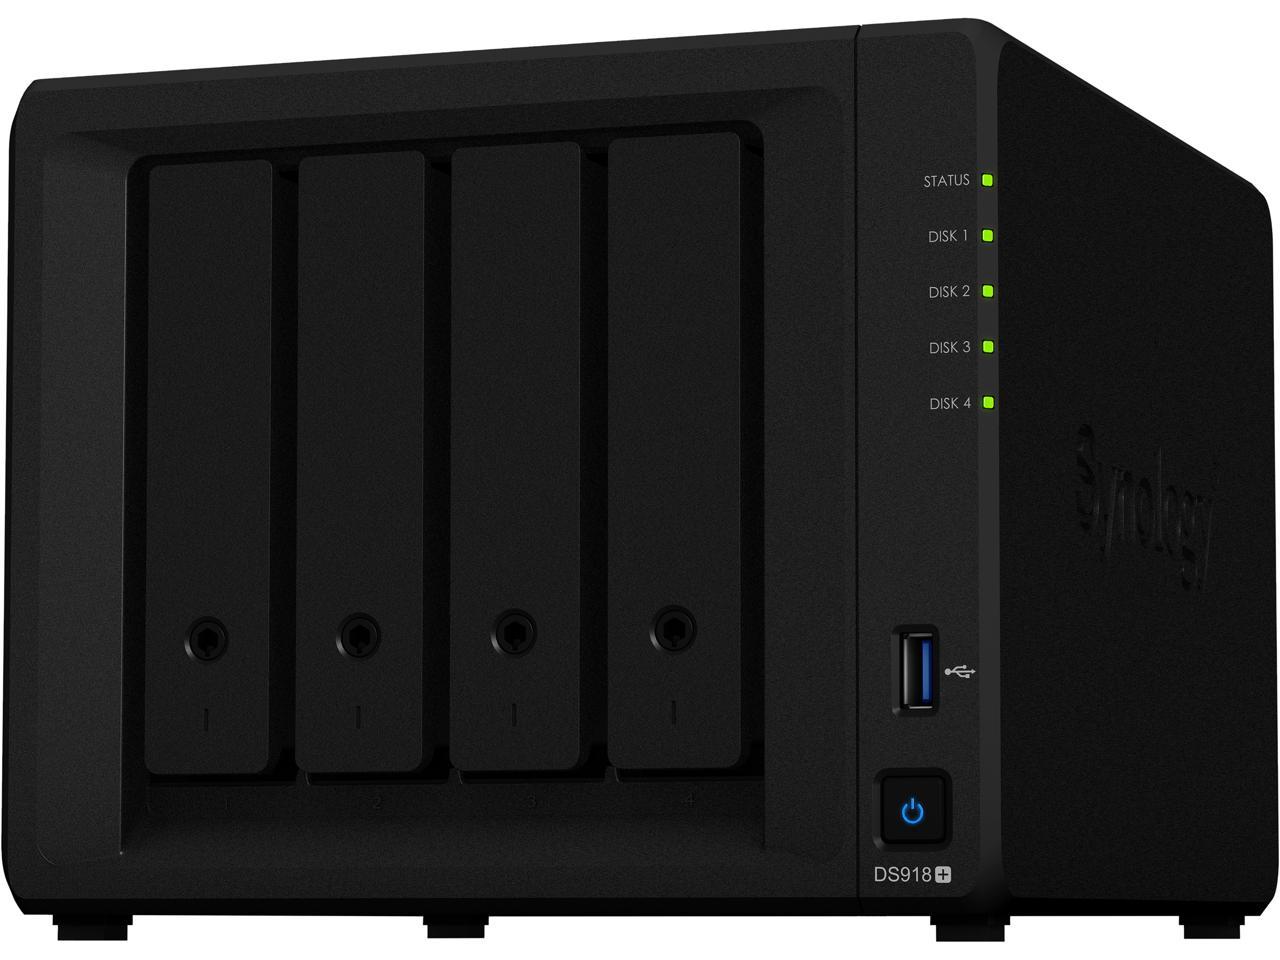 PC/タブレット PC周辺機器 Synology 4 bay NAS DiskStation DS918+ (Diskless) - Newegg.com